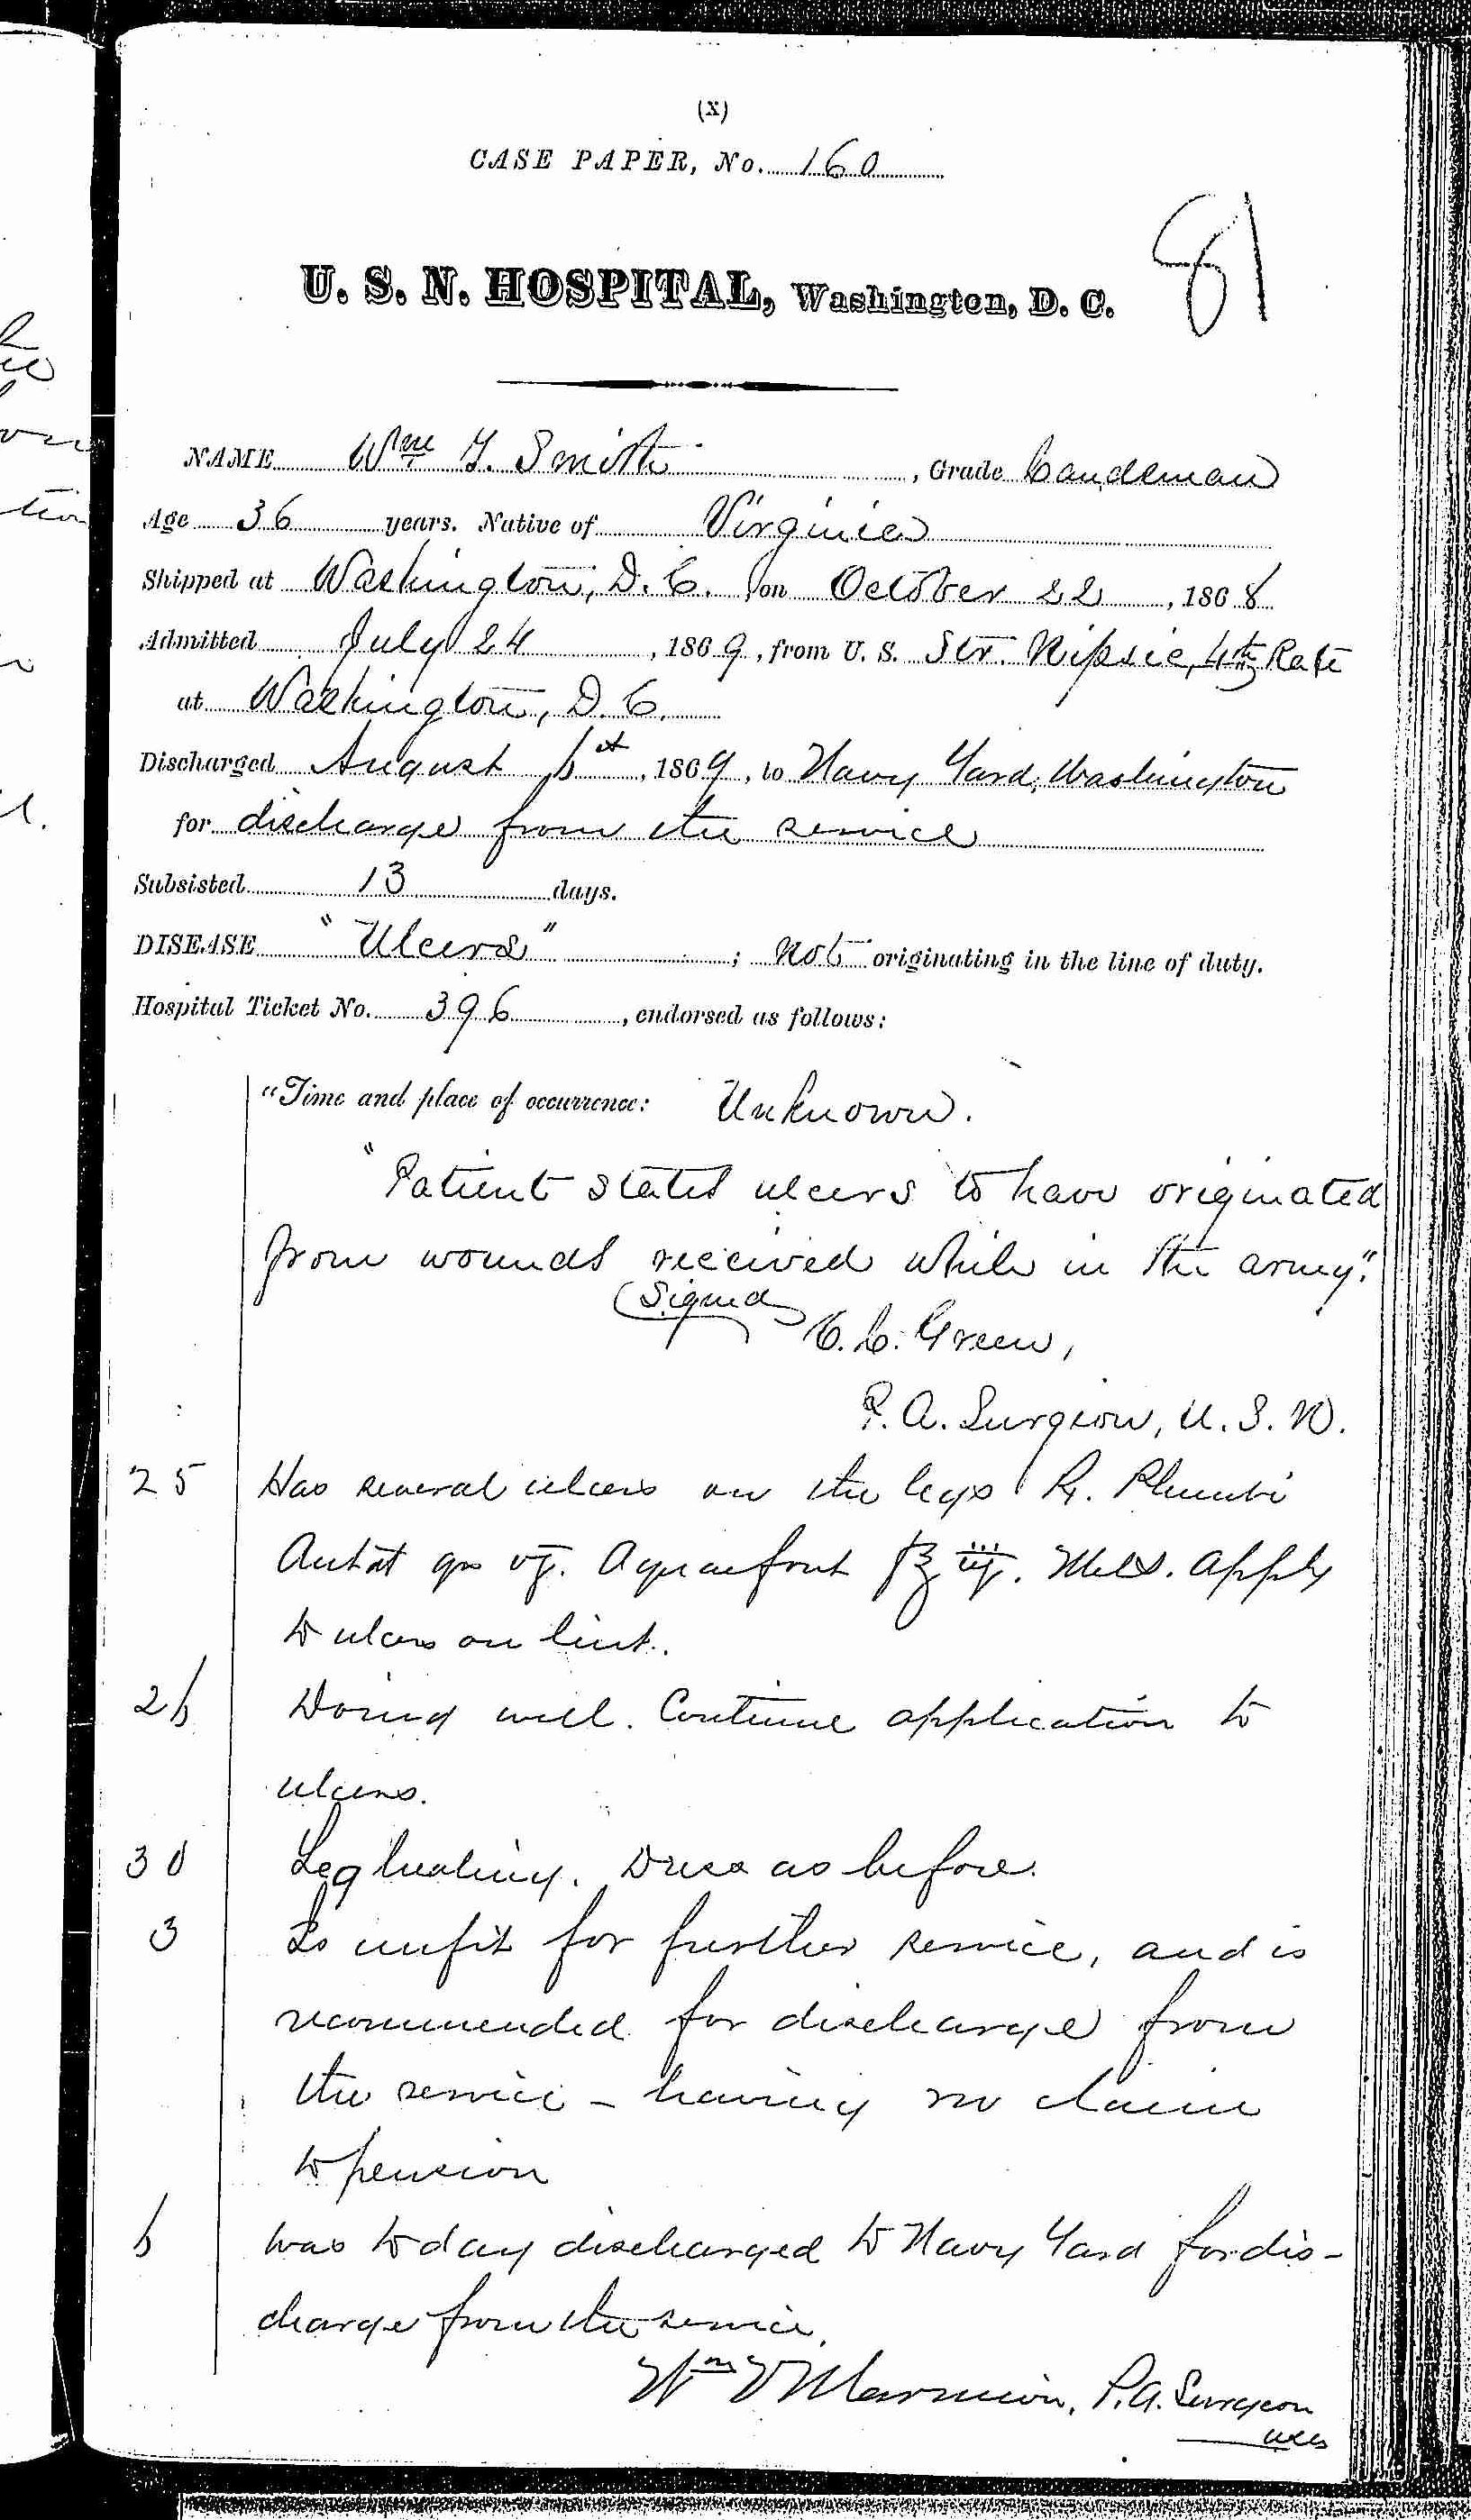 Entry for William T. Smith (page 1 of 1) in the log Hospital Tickets and Case Papers - Naval Hospital - Washington, D.C. - 1868-69